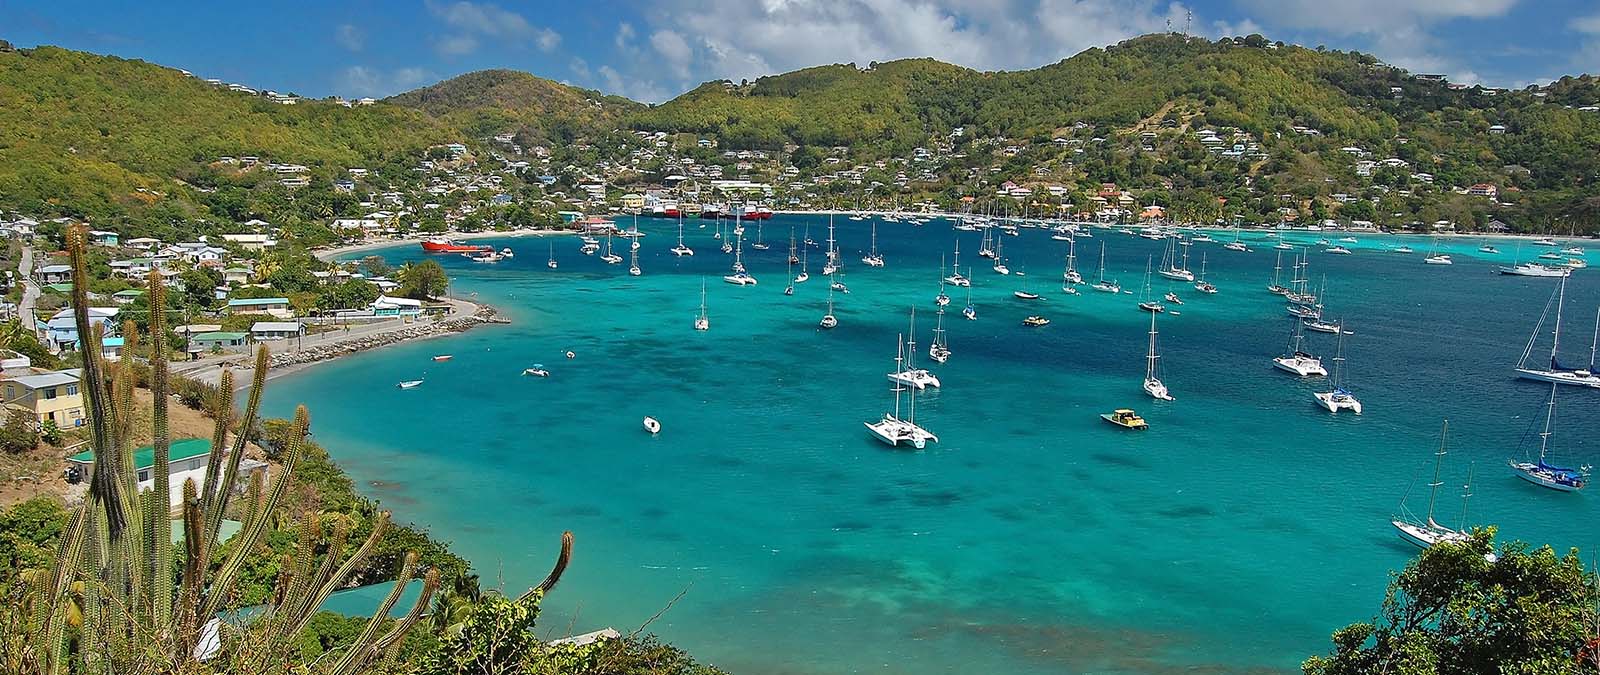 More commonly known as the “Spice Isle”, Grenada offers beautiful unspoilt beaches, diving, sailing, hiking and so much more.